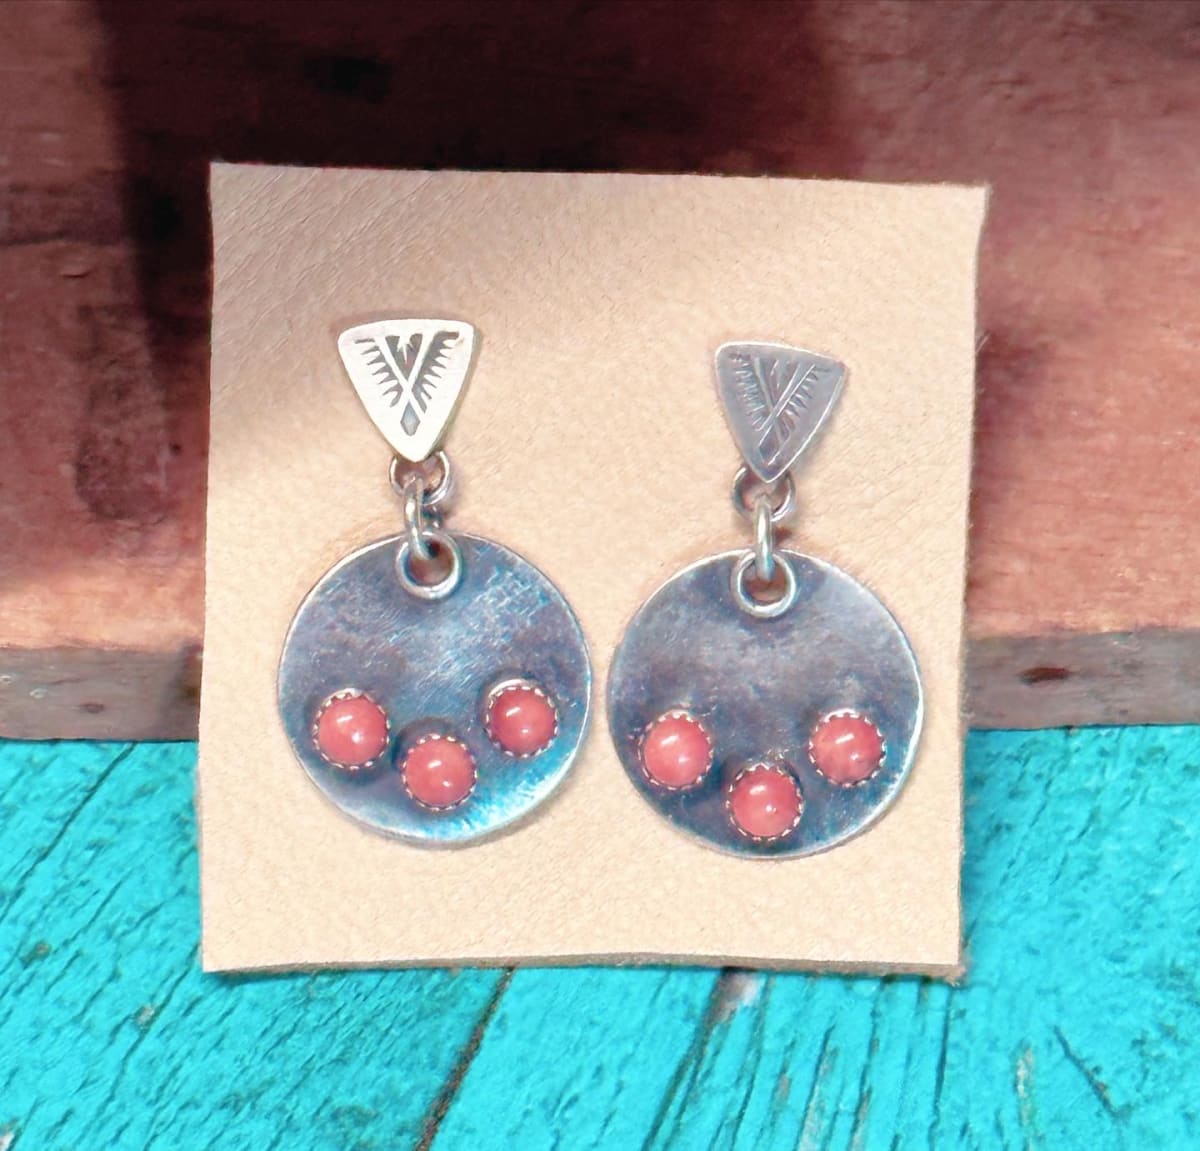 "Three Stone Stamped Luna Earrings" - Sterling Silver and Spiney Oyster, Triangle Stamp Detail by Shasta Brooks  Image: All Art © Shasta Brooks Studio LLC